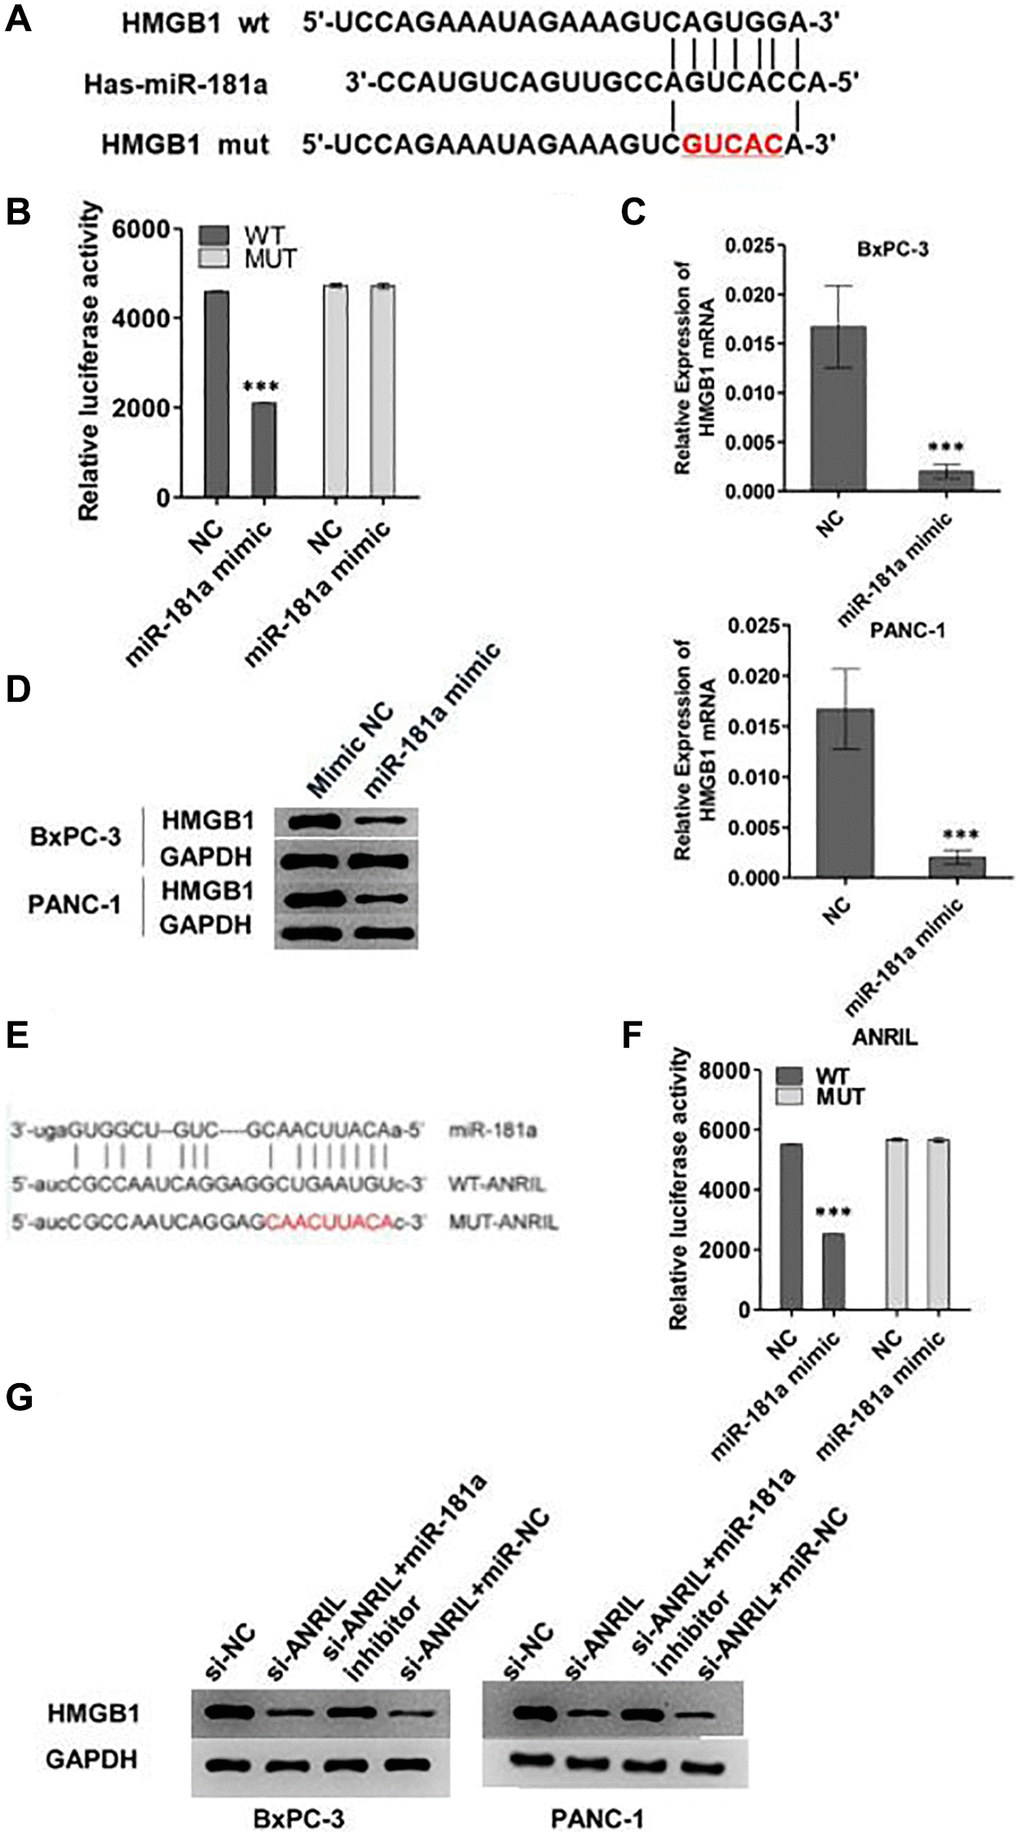 ANRIL-miR-181a-HMGB1 axis is critical for the progression pancreatic cancer. (A) The image reflected the binding sequence between miR-181a and HMGB1, and the corresponding mutant sequence between them. (B) Relative double luciferase activity experiment reflected the regulation of wild type HMGB1 and mutant HMGB1 activity by miR-181a. (C, D) Western blot and qRT-PCR analyzed the HMGB1 expression level which caused by miR-181a. (E) The image reflected the binding sequence of miR-181a and ANRIL, and mutant sequence between them. (F) Relative double luciferase activity experiment reflected the regulation of wild type ANRIL and mutant ANRIL activity by miR-181a. (G) The results of ANRIL mRNA and protein level indicated that it was regulated by miR-181a. *P **P ***P 